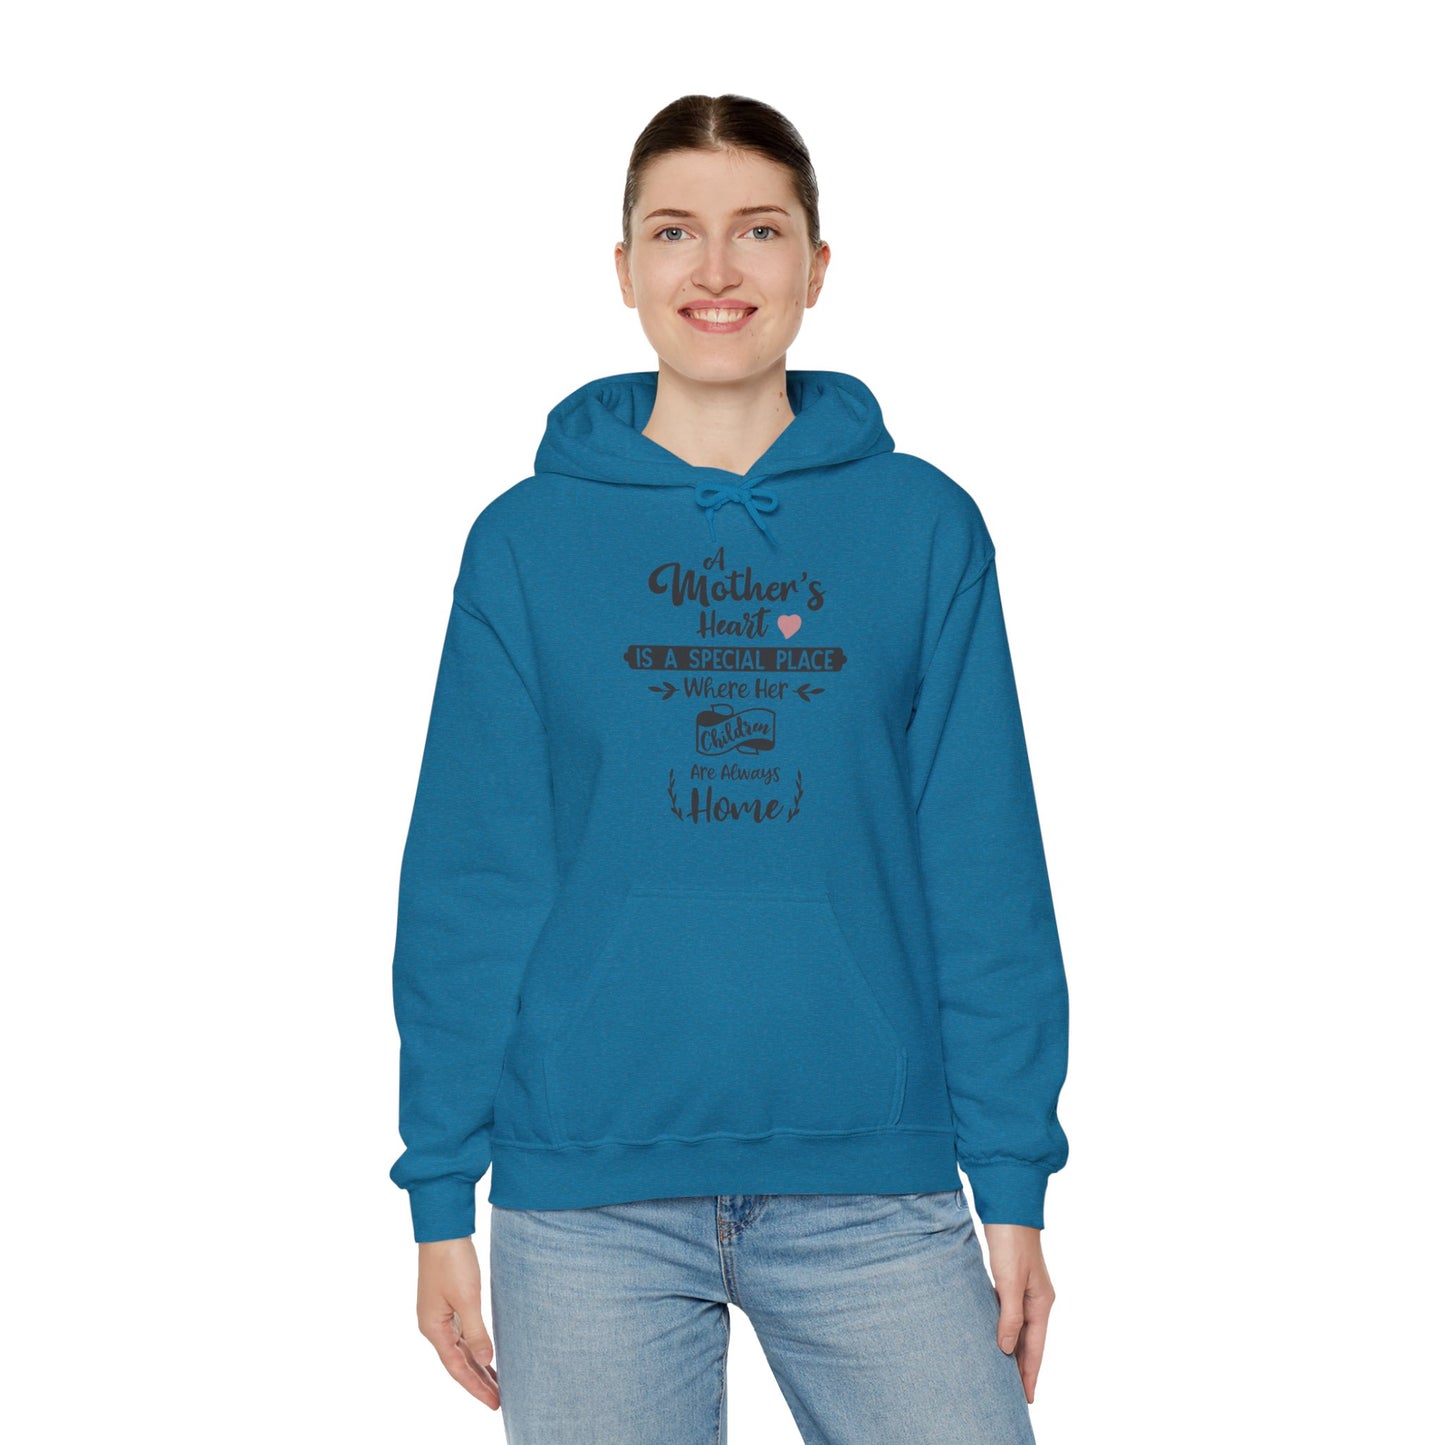 A Mother's heart is a special place - Unisex Heavy Blend™ Hooded Sweatshirt